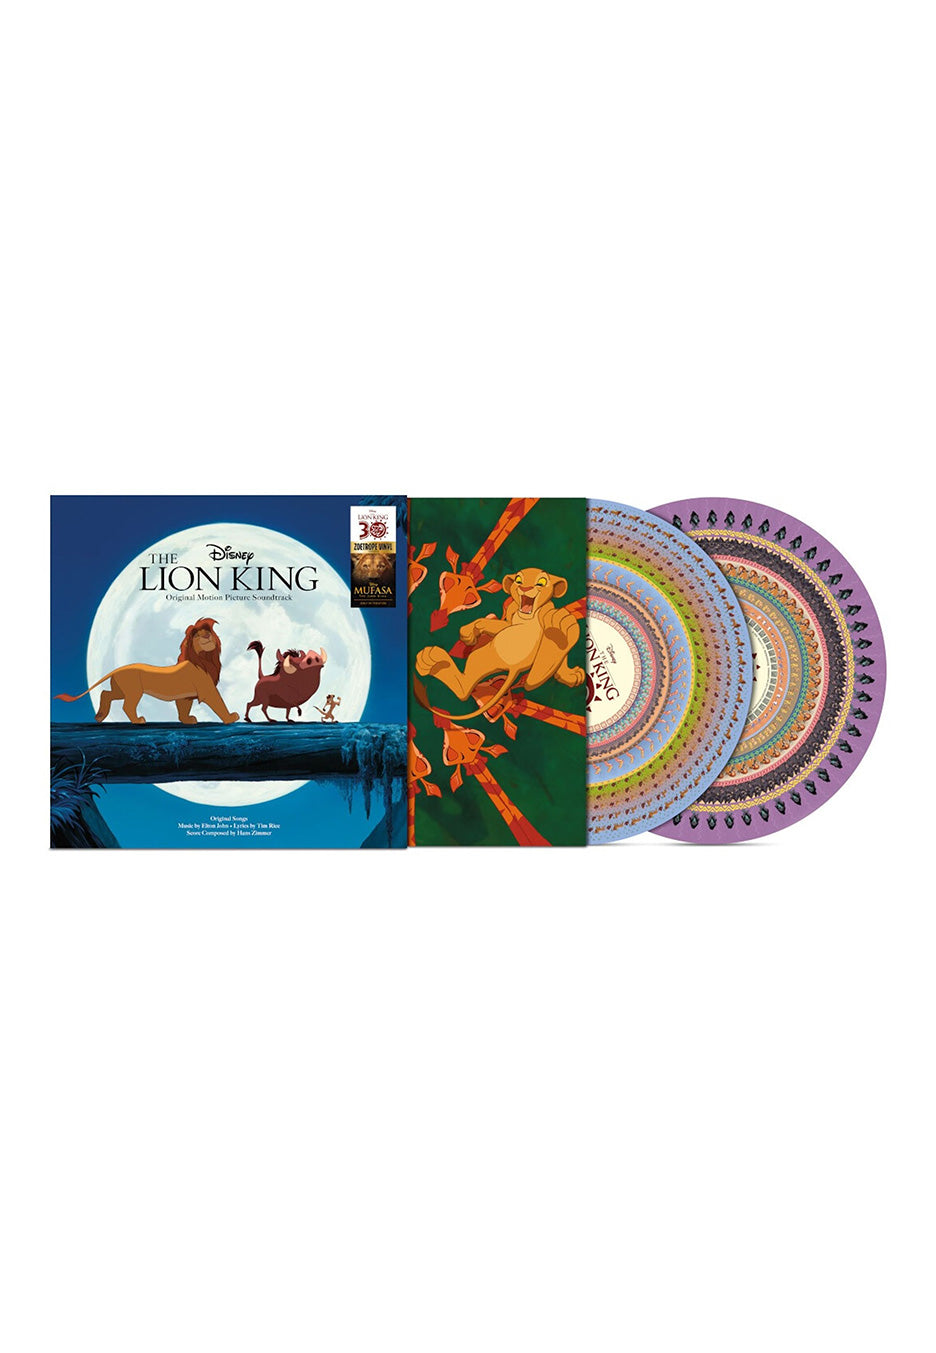 The Lion King - The Lion King (30th Anniversary Edition) Ltd. Zoetrope - Colored Vinyl | Neutral-Image